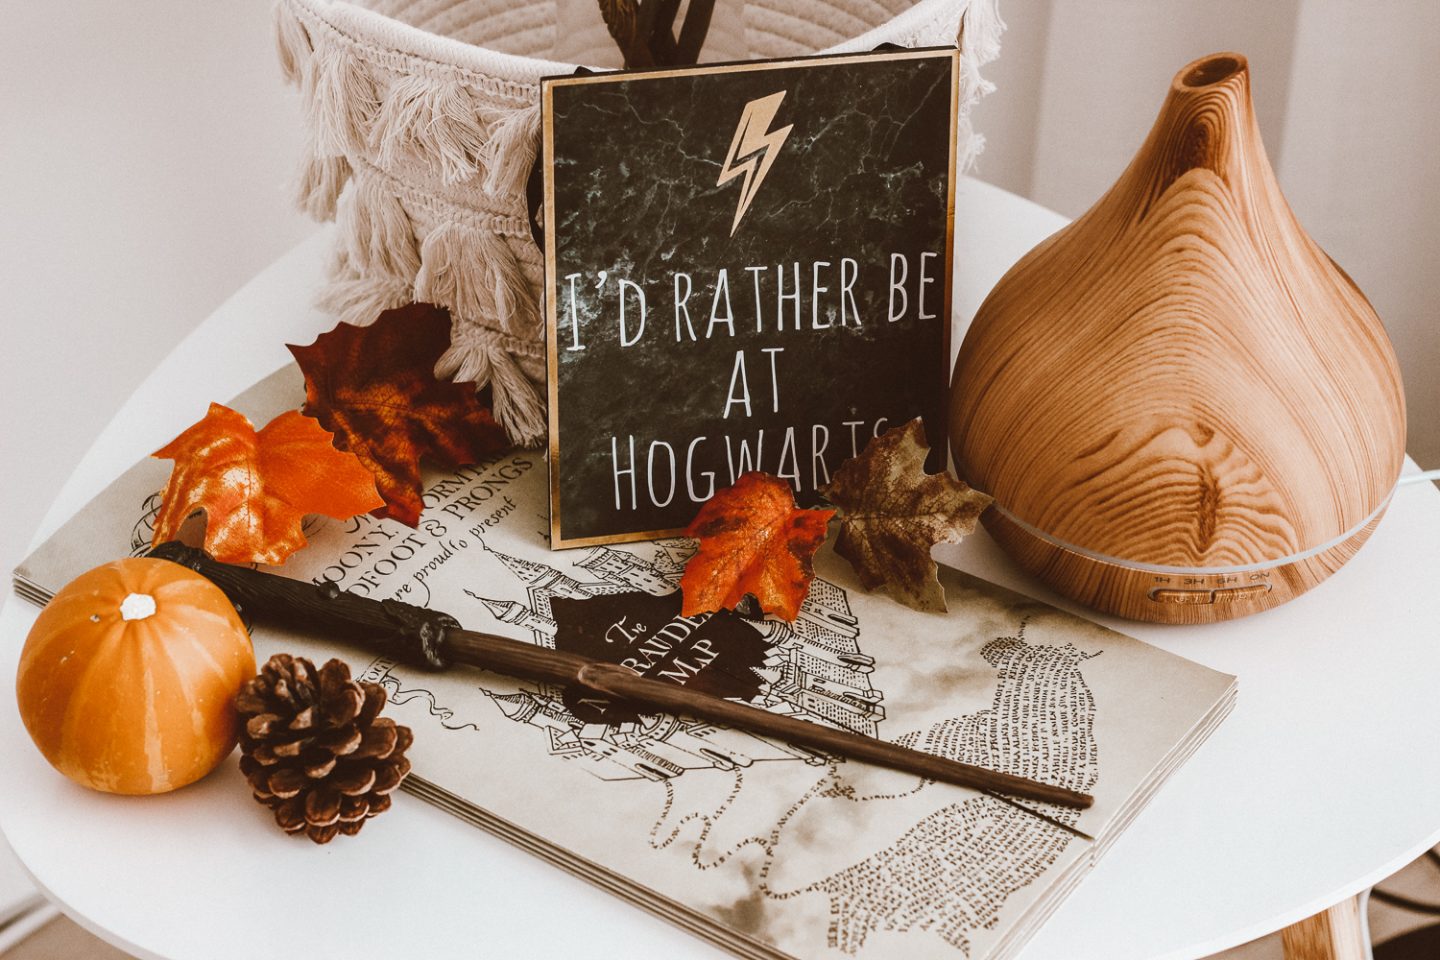 Harry Potter Theme Decorations Ideas for Halloween